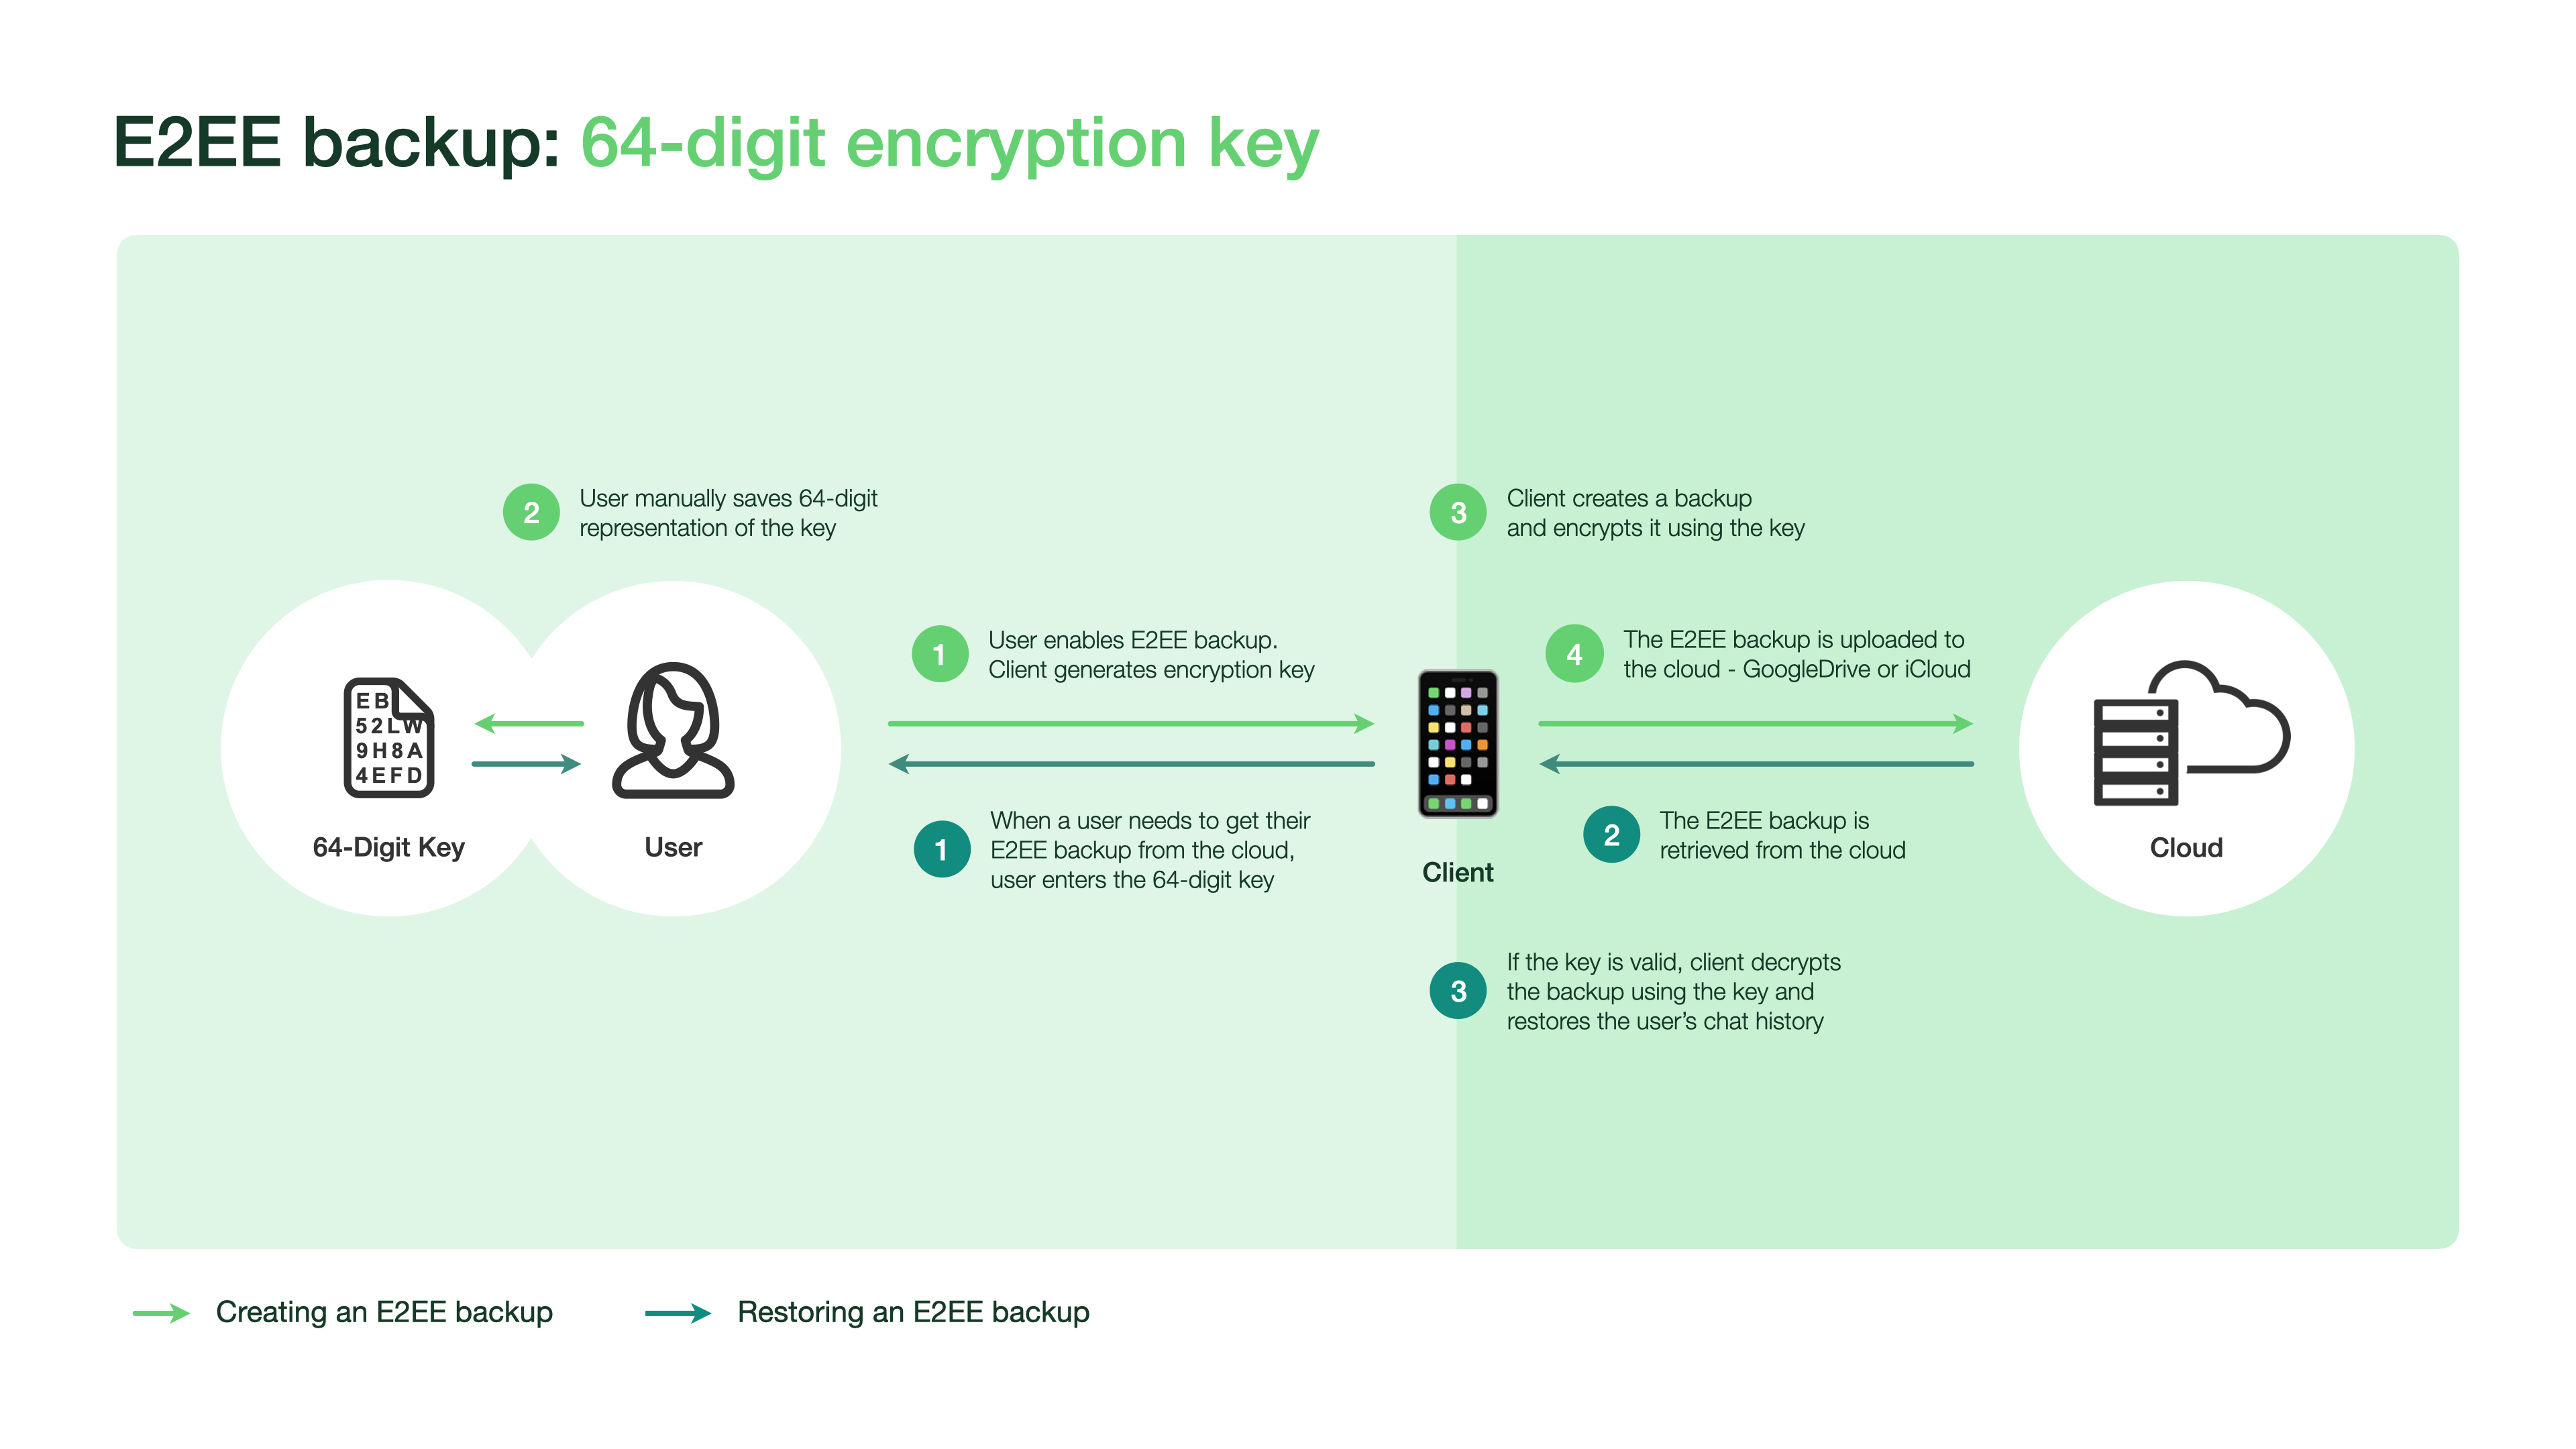 WhatsApp end-to-end encrypted backups